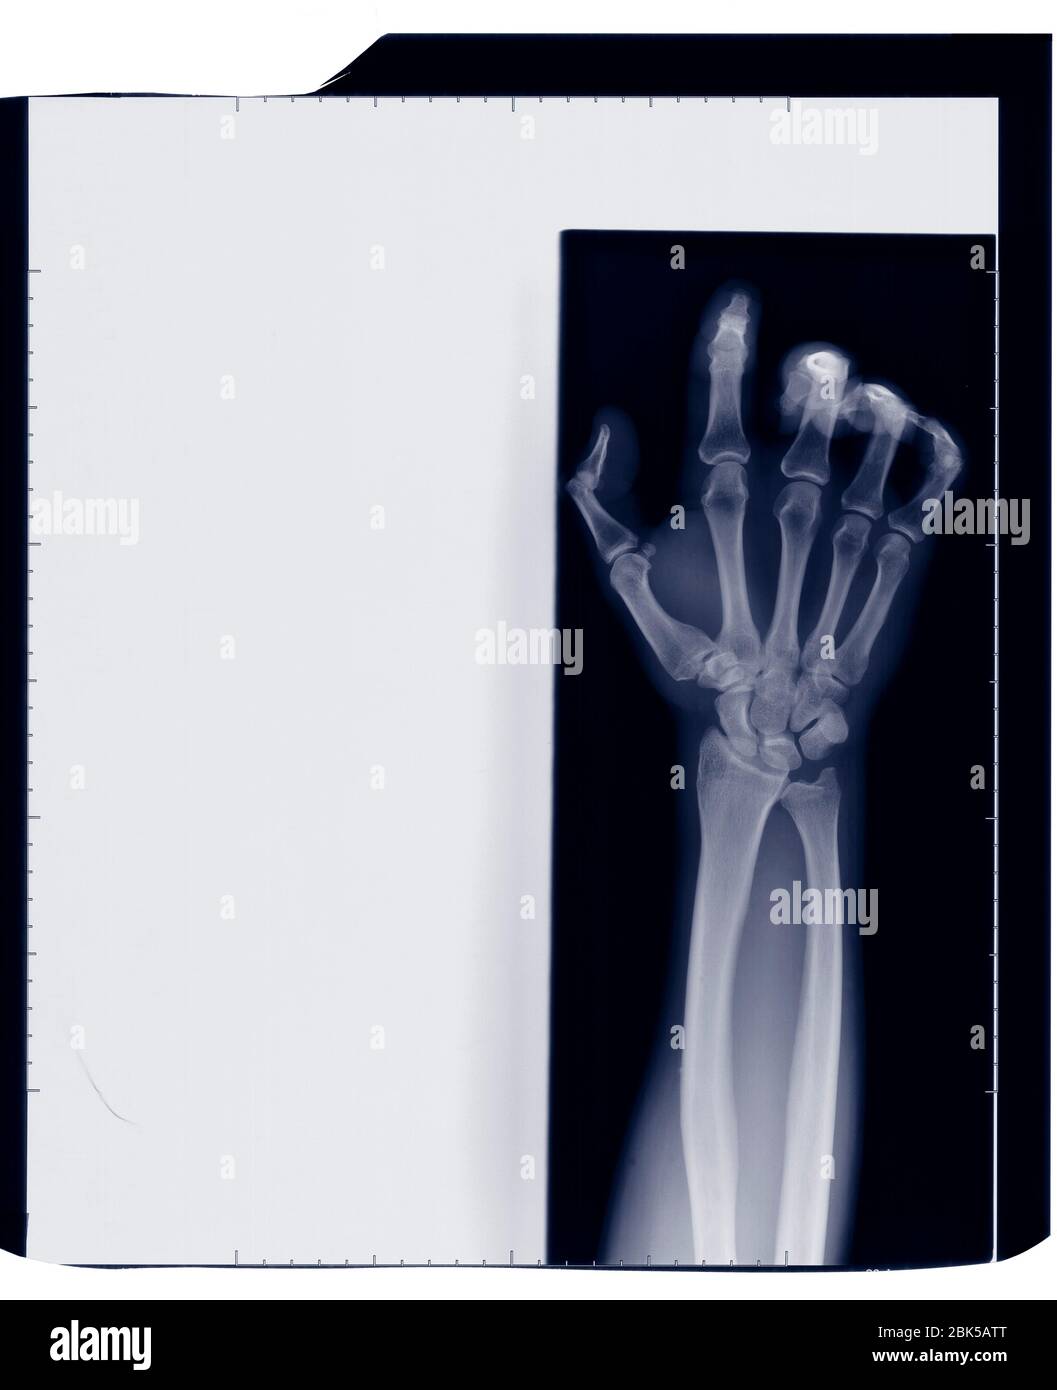 Hand and arm with curled fingers, X-ray. Stock Photo